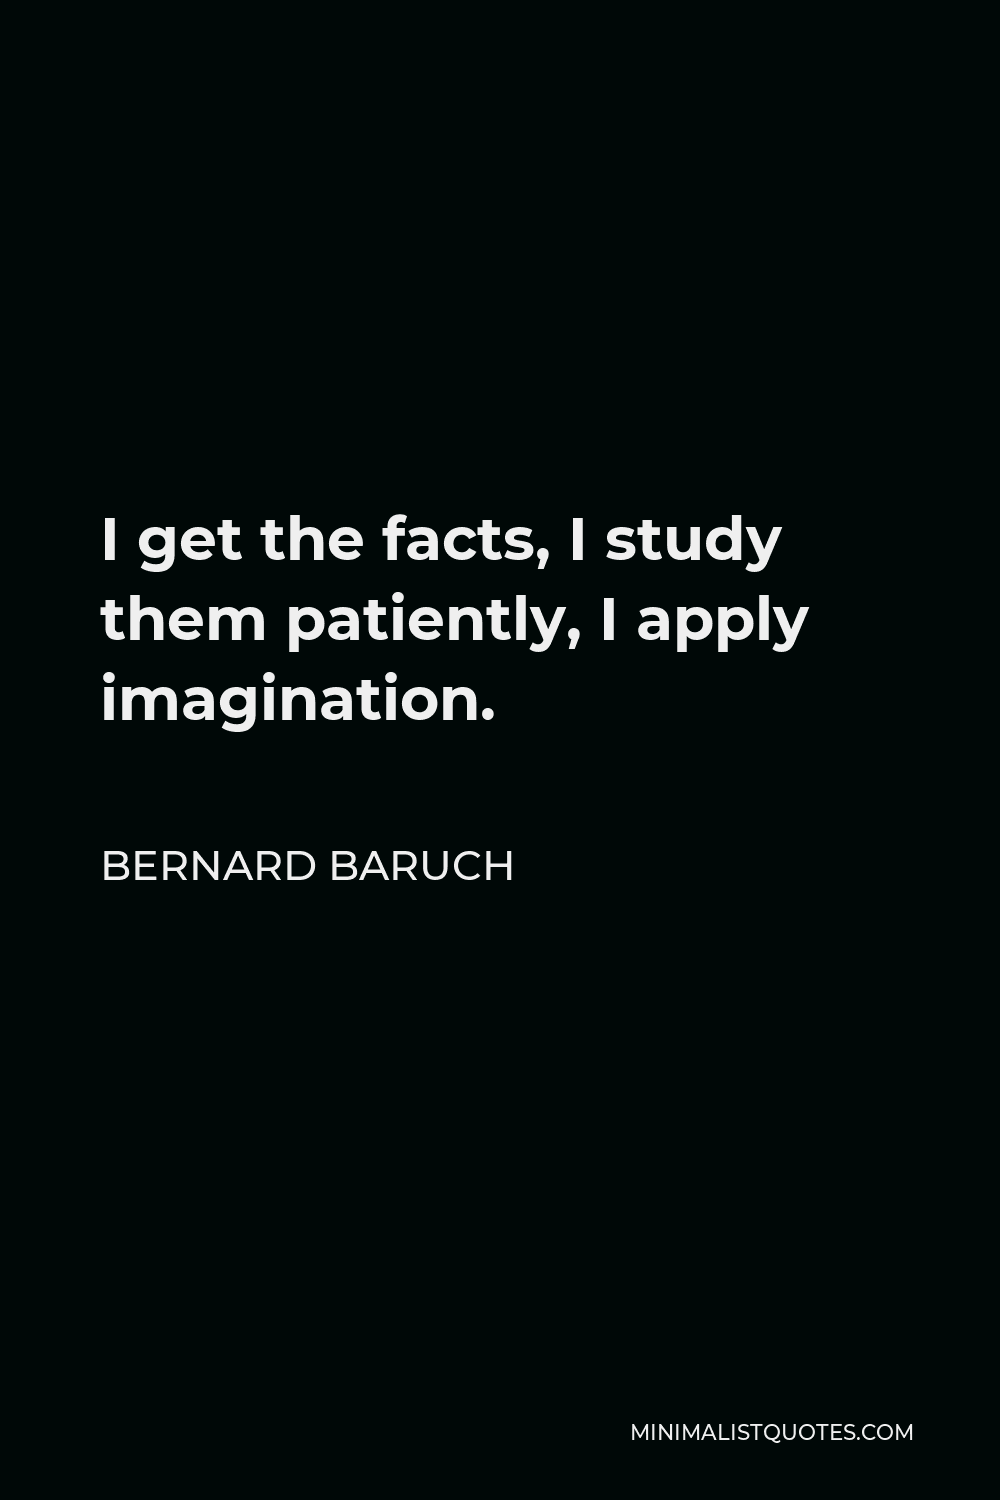 Bernard Baruch Quote - I get the facts, I study them patiently, I apply imagination.